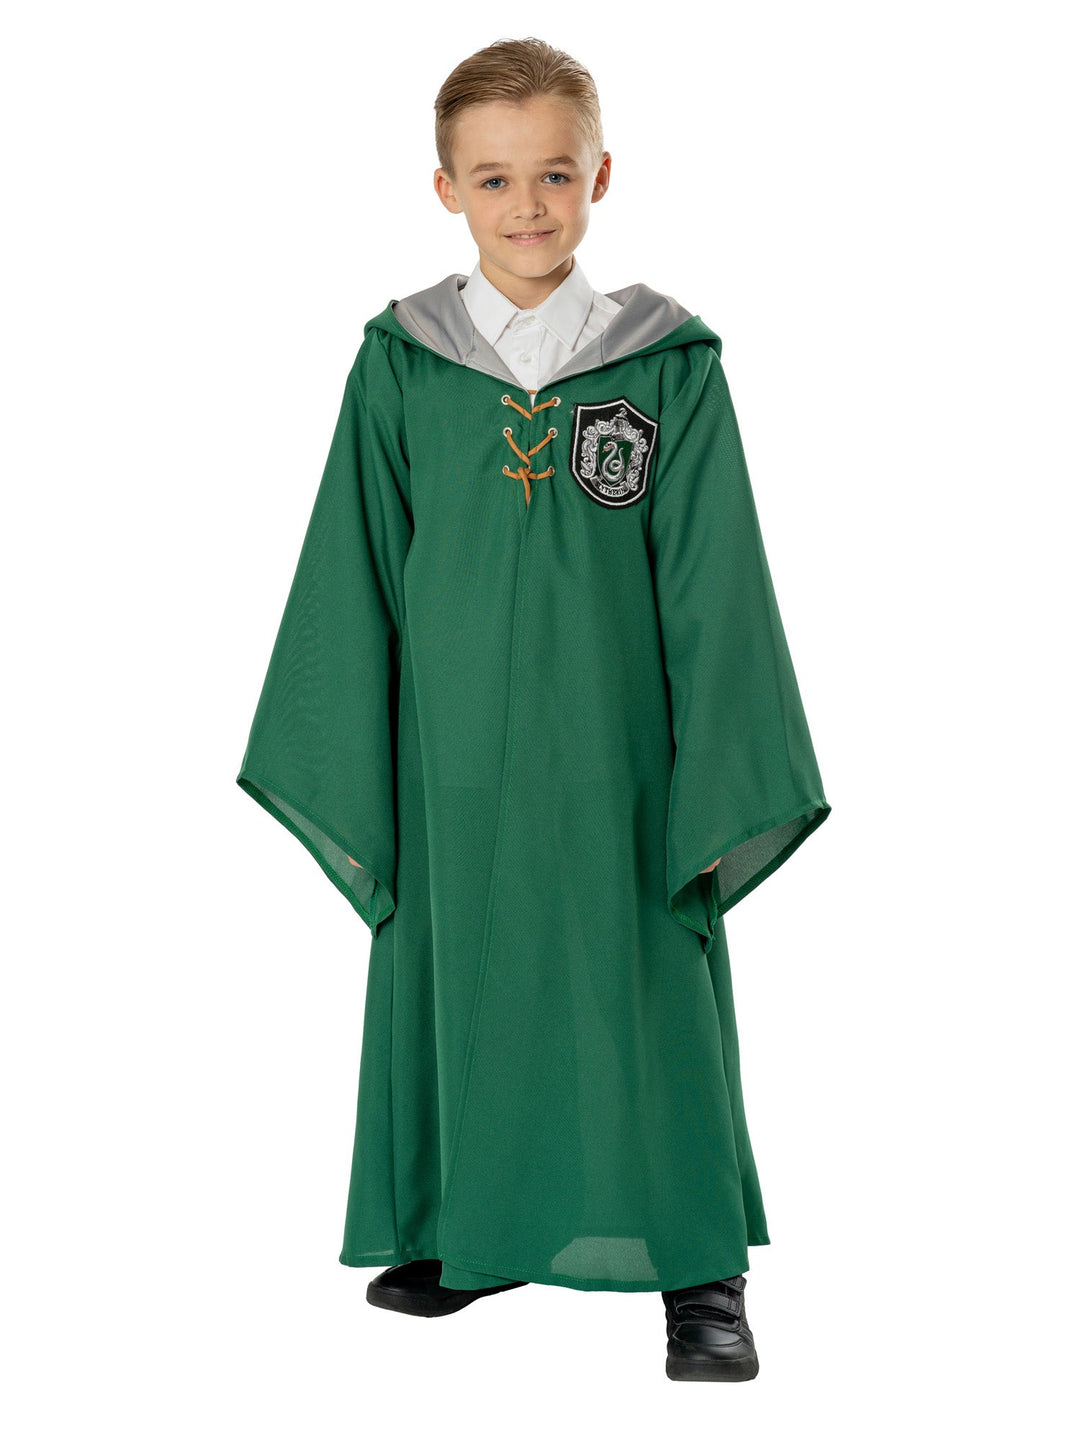 Slytherin Quidditch Robe for Kids Harry Potter Costume